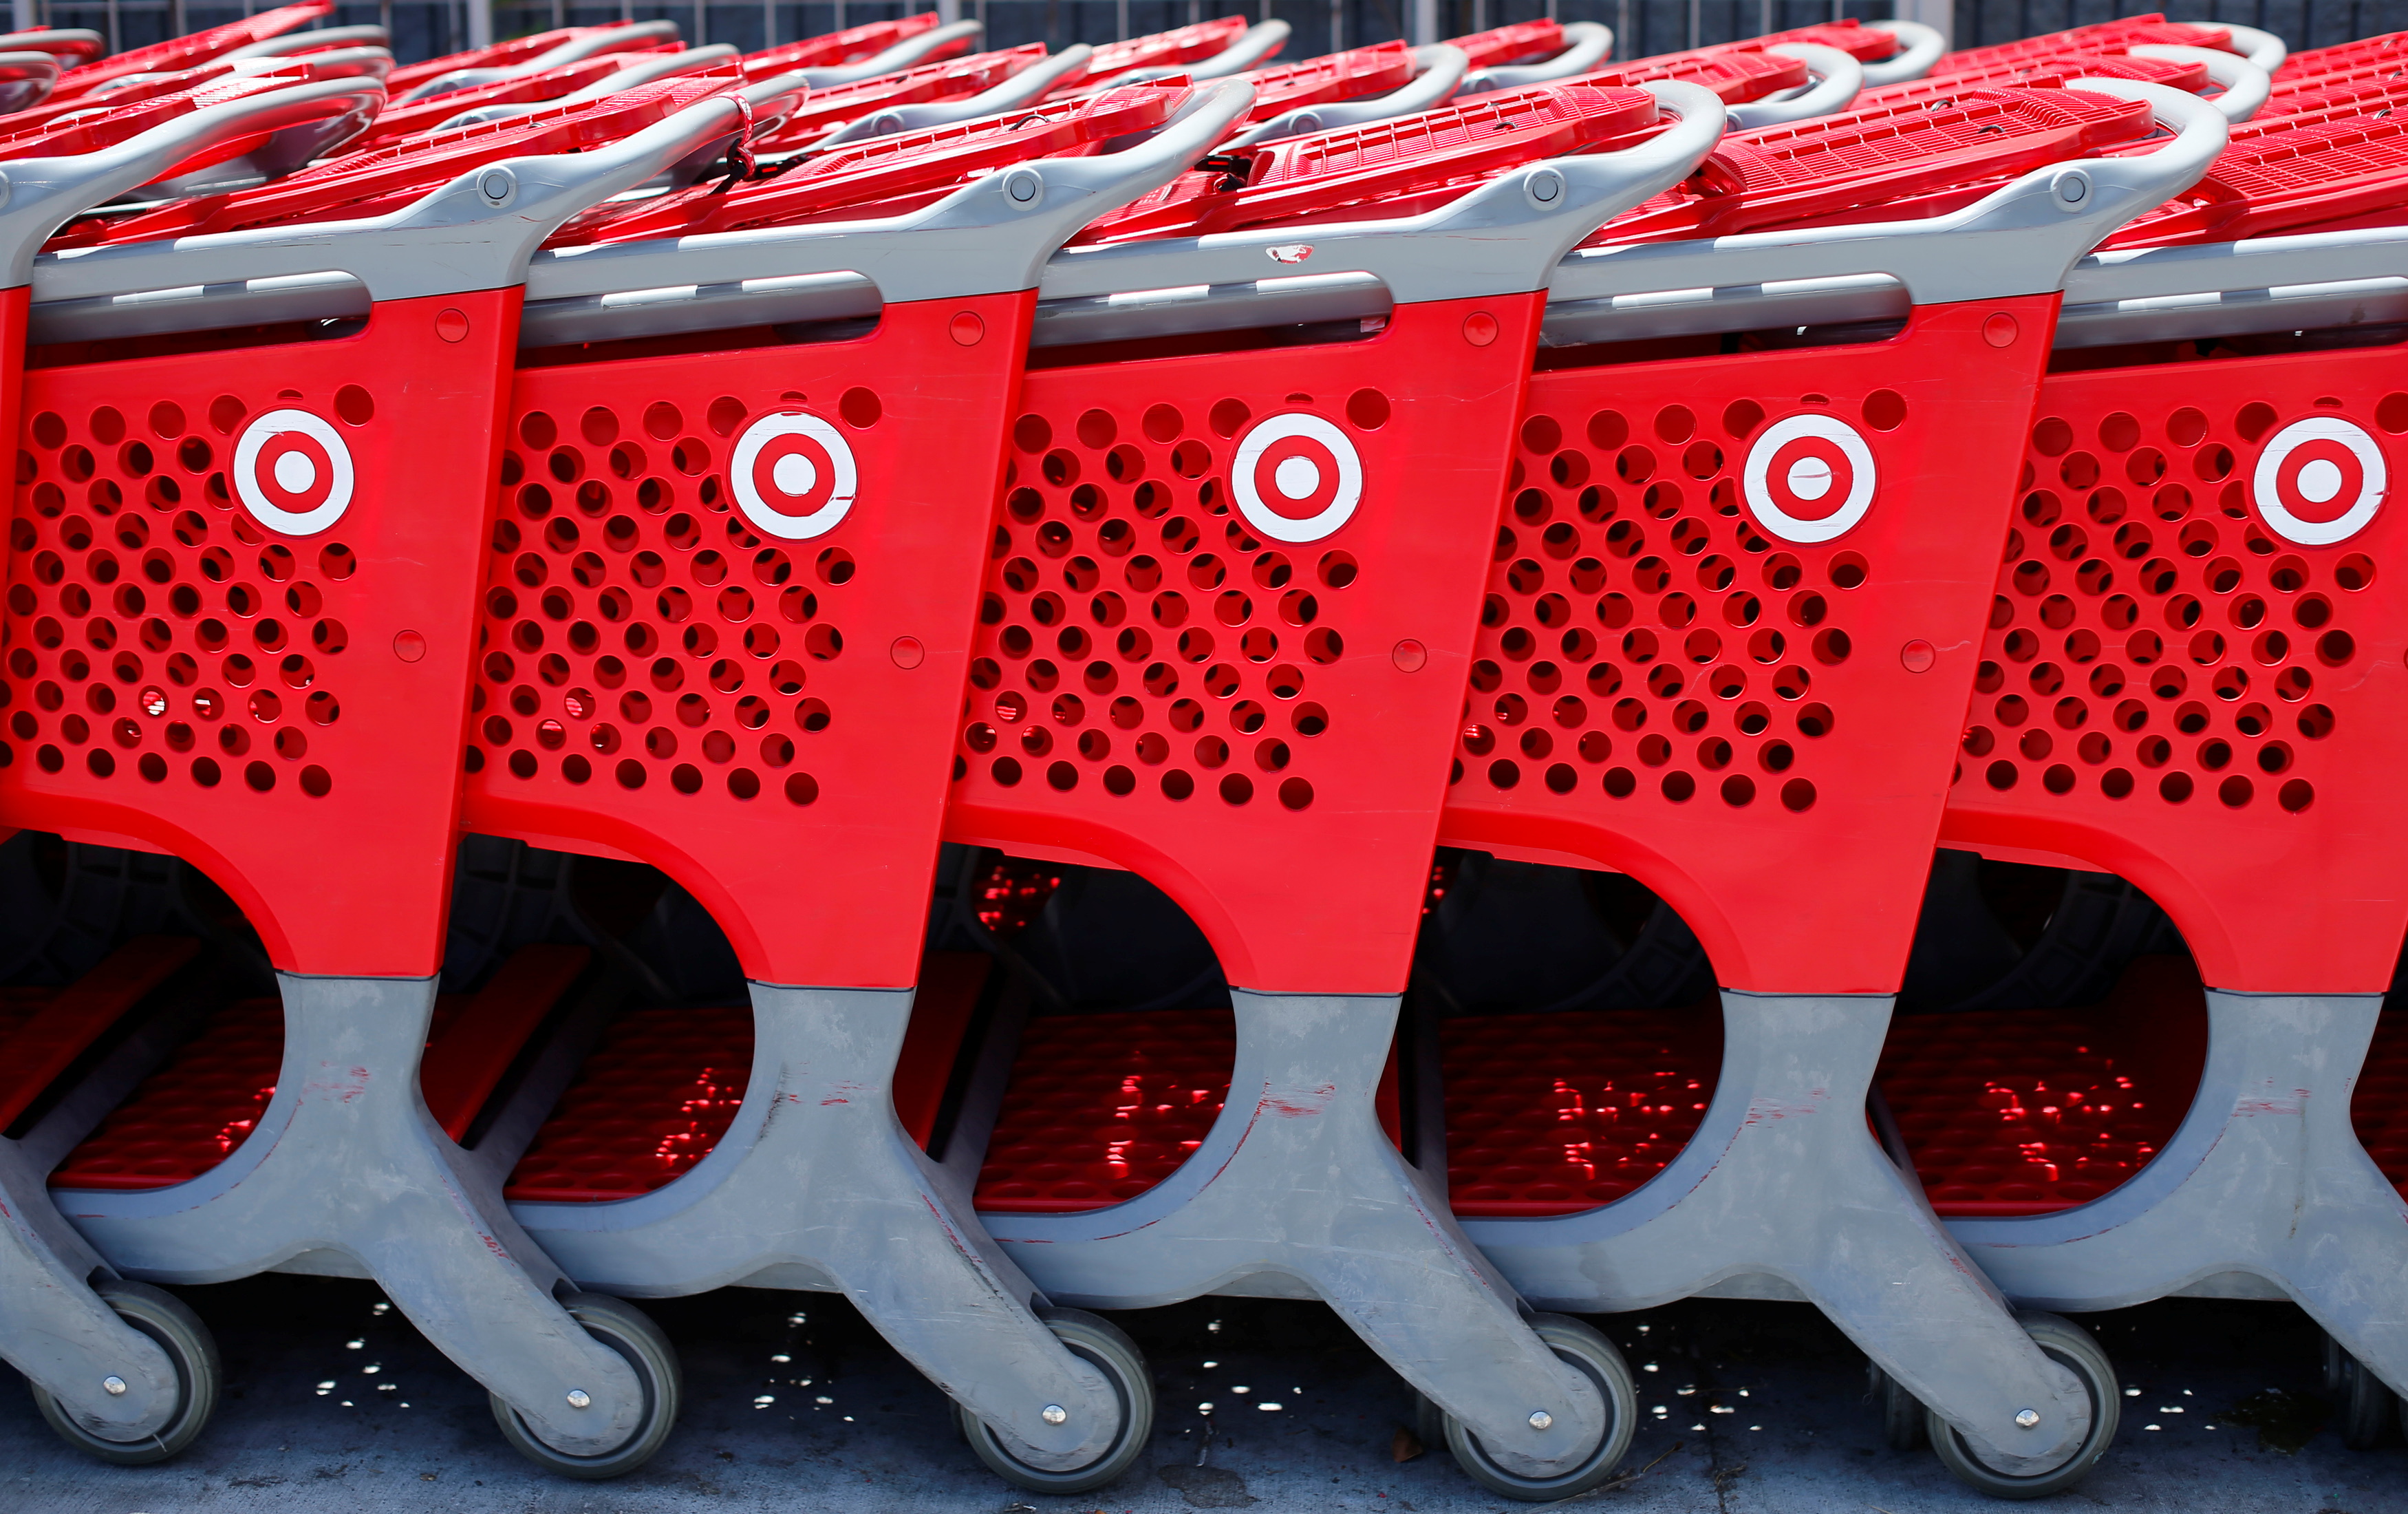 Shopping carts from a Target store are lined up in Encinitas, California May 22, 2013. REUTERS/Mike Blake/File Photo